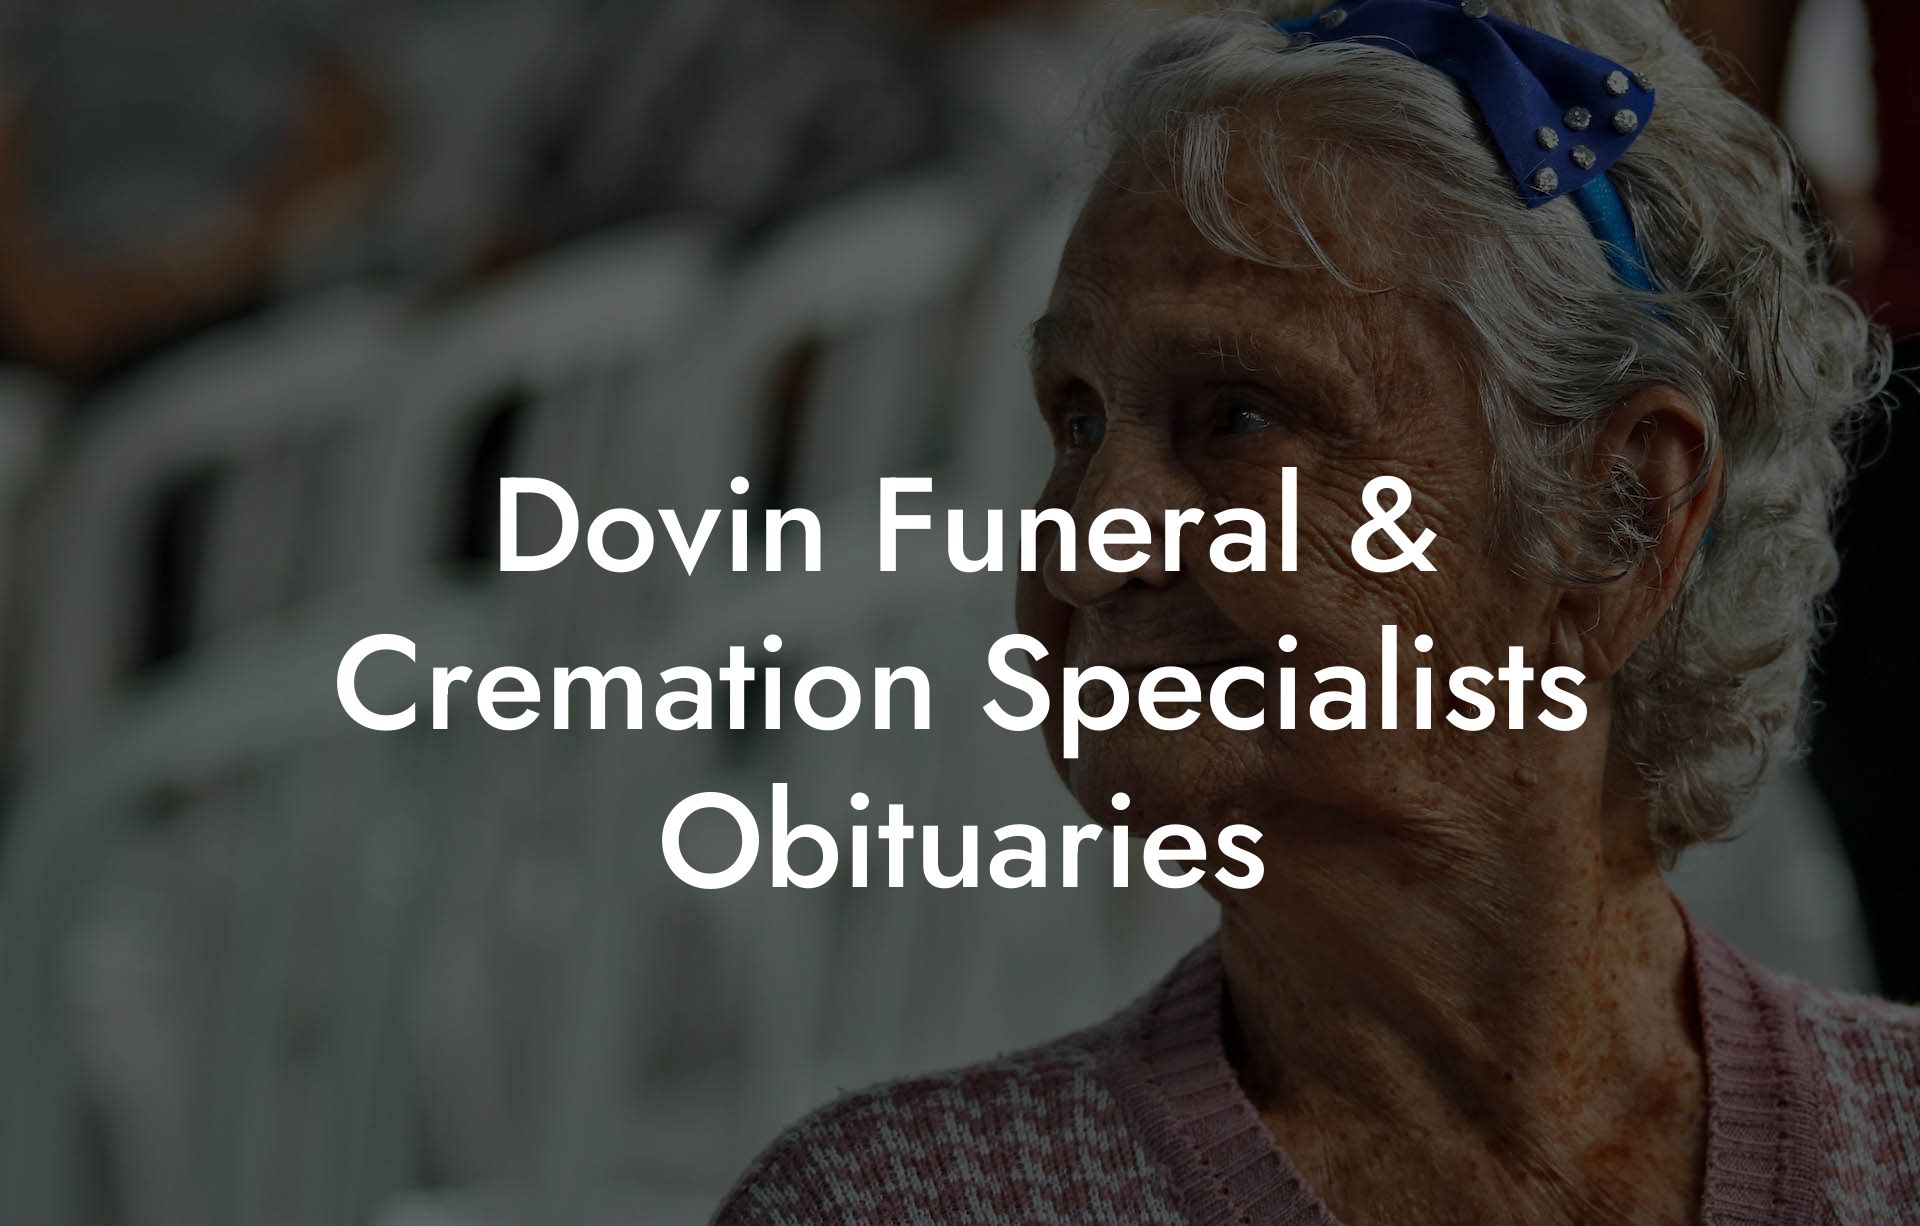 Dovin Funeral & Cremation Specialists Obituaries